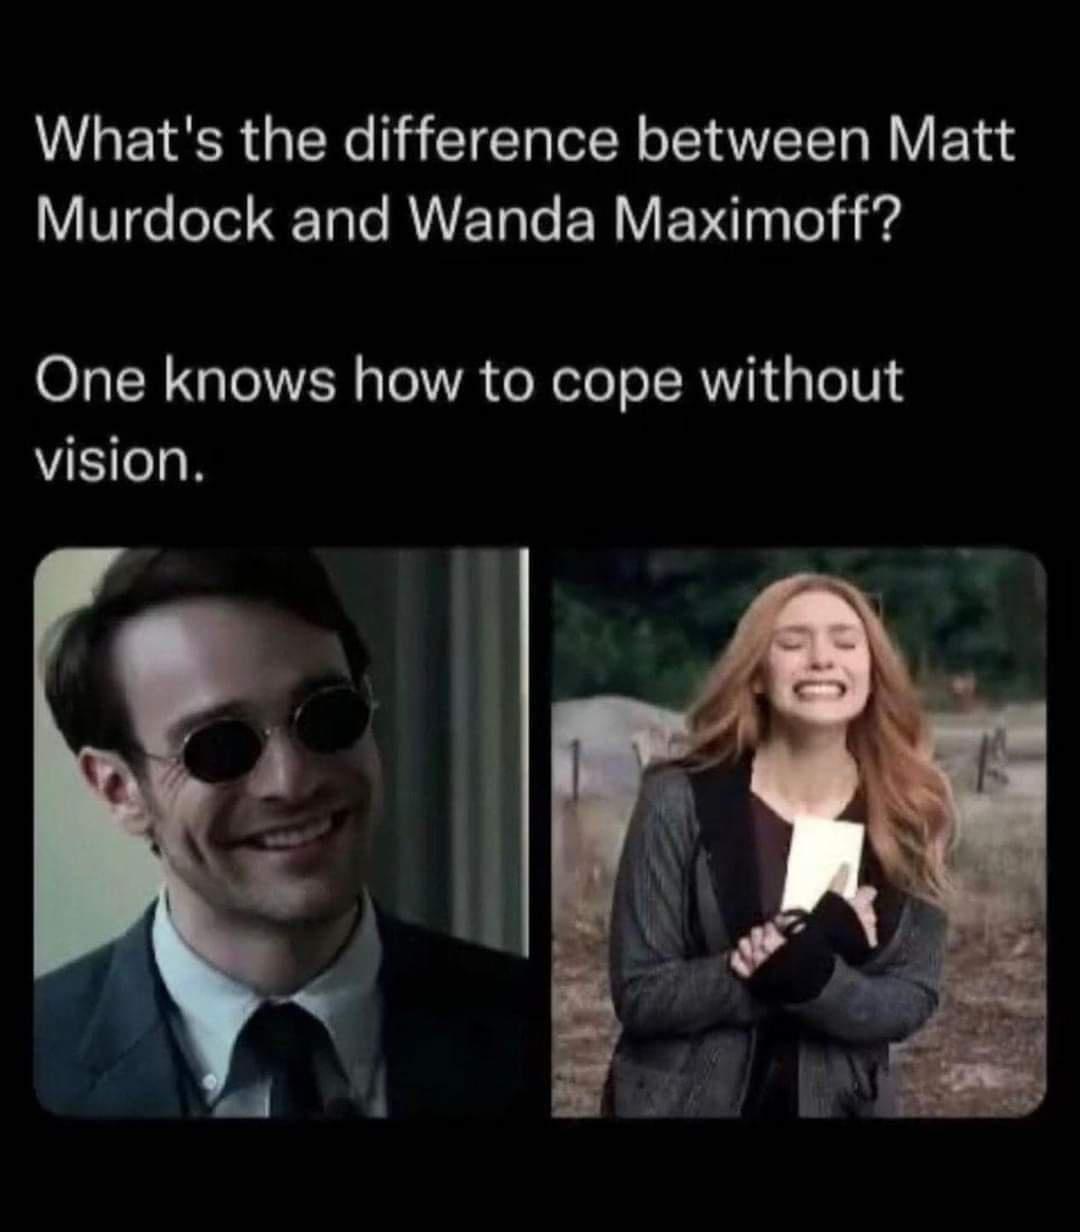 funny memes - what's the difference between matt murdock and wanda maximoff - What's the difference between Matt Murdock and Wanda Maximoff? One knows how to cope without vision. 40